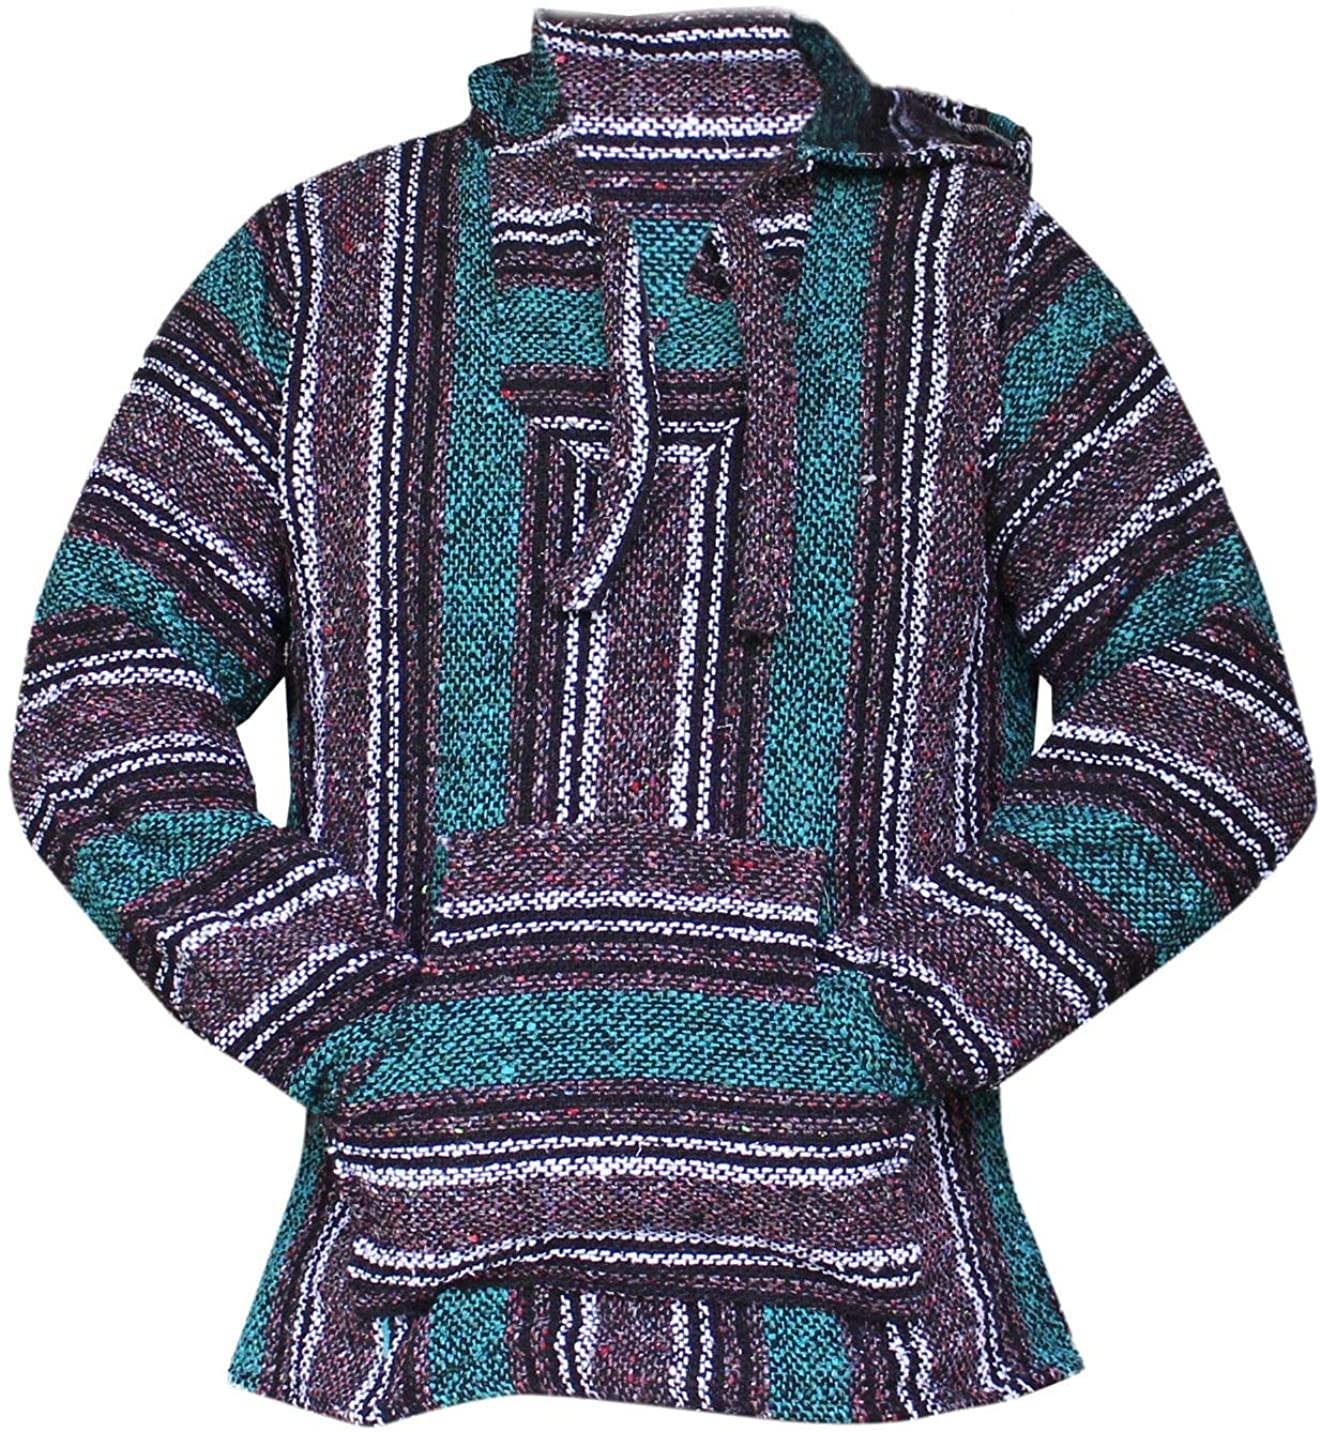 Poncho Pullover Kid's Sizes Mexican Baja Hoodie Hippie Jerga Surfer